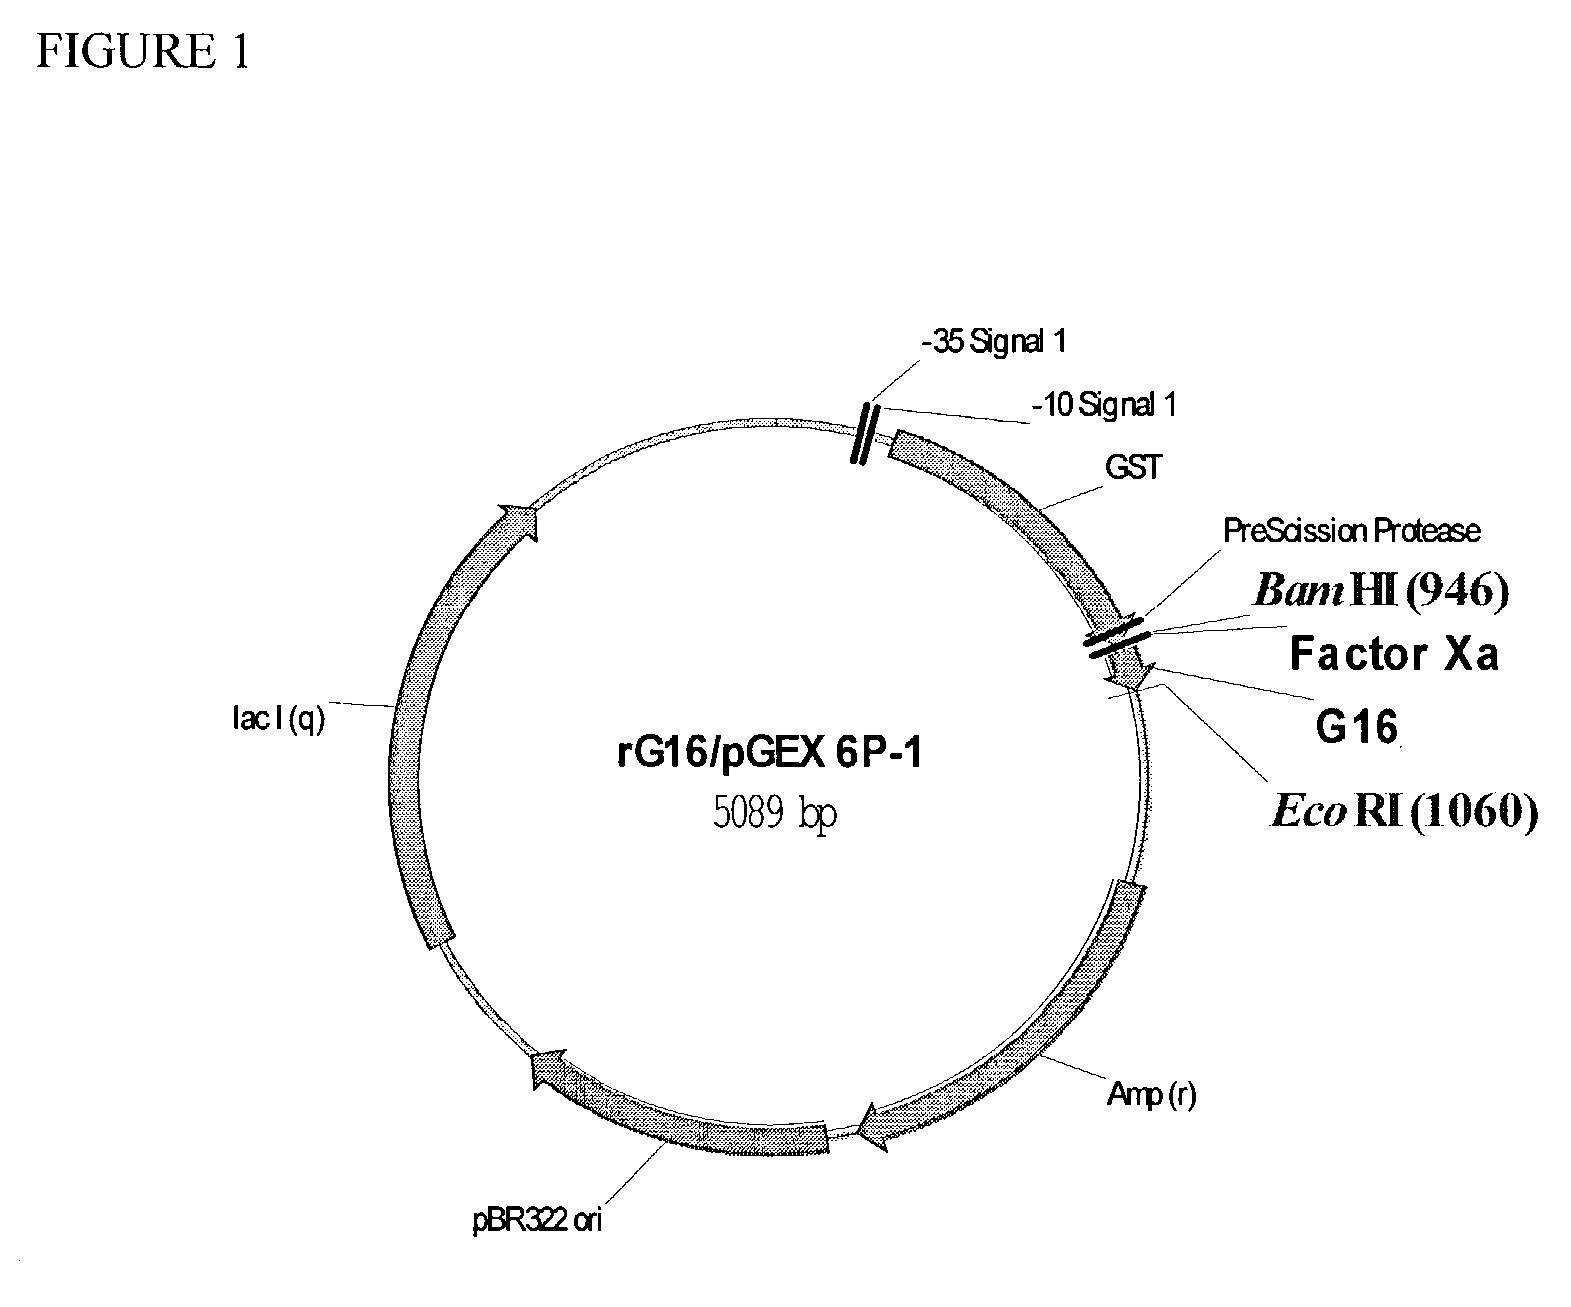 Methods of treating type 2 diabetes with peptides acting as both GLP-1 receptor agonists and glucagon receptor antagonists